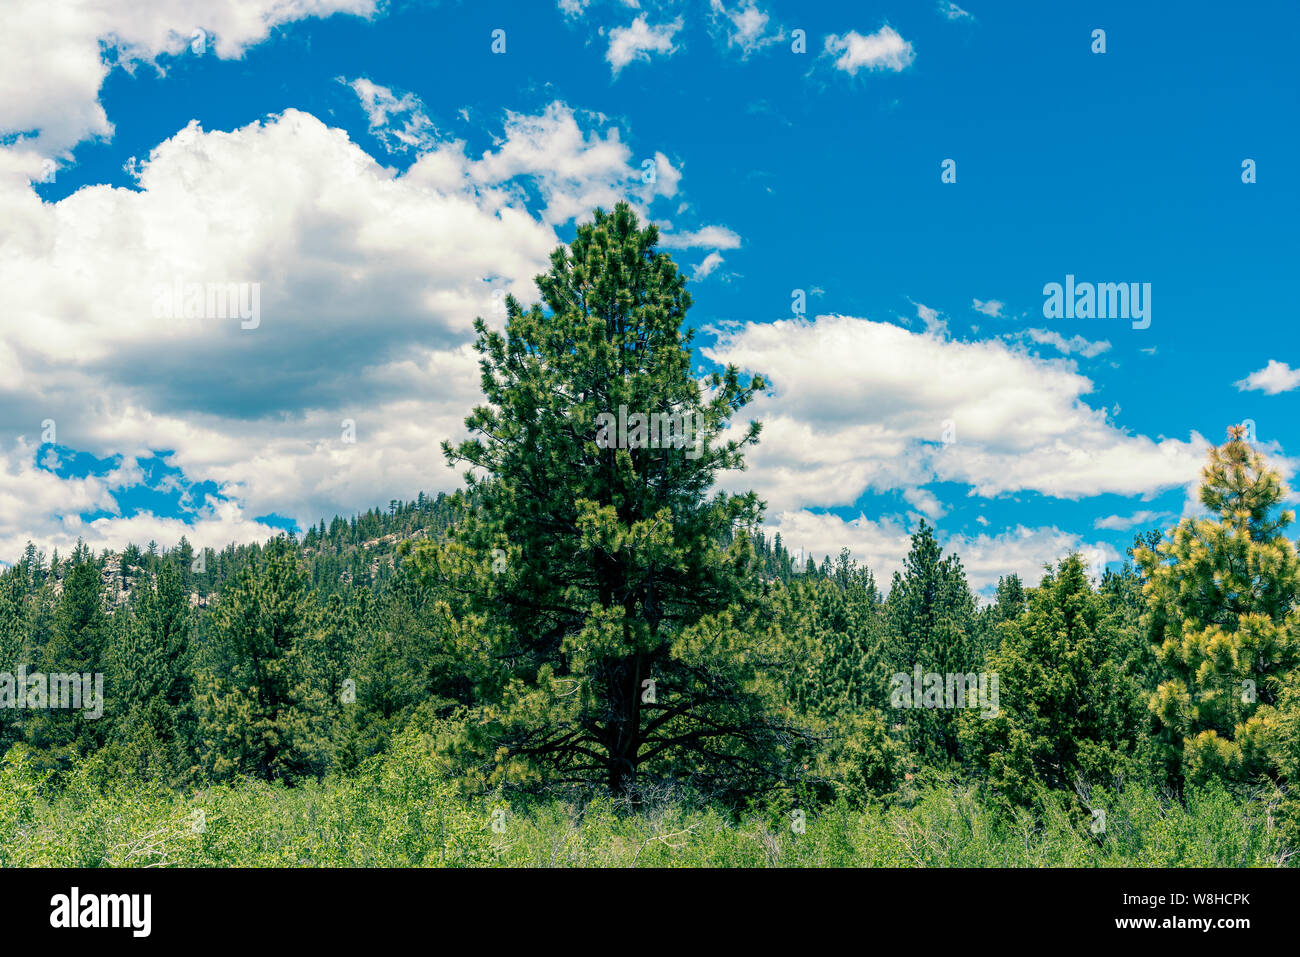 Green meadows with tall pine trees under bright blue skies with white fluffy clouds. Stock Photo